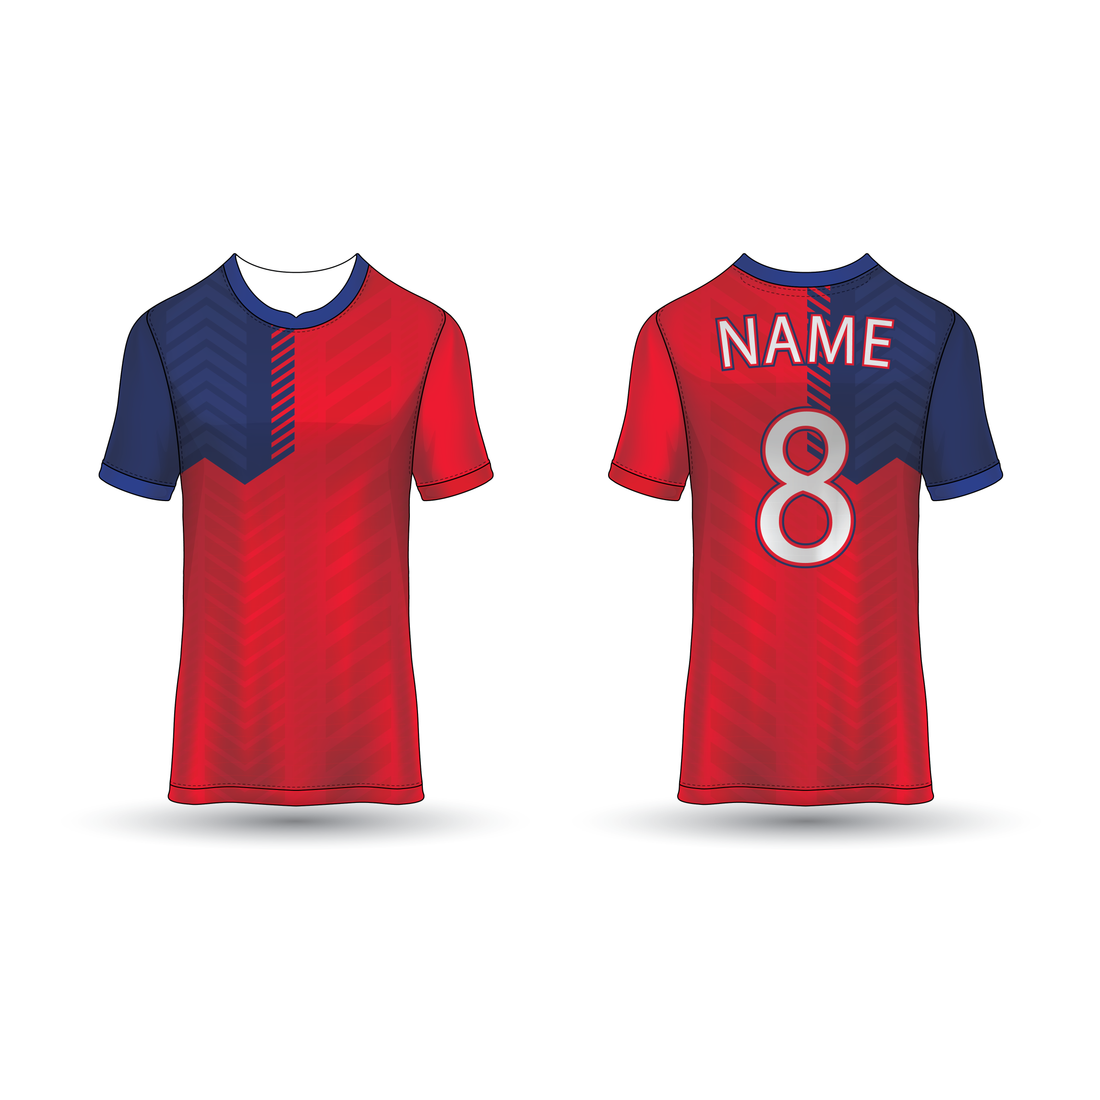 NEXT PRINT All Over Printed Customized Sublimation T-Shirt Unisex Sports Jersey Player Name & Number, Team Name NP50000221